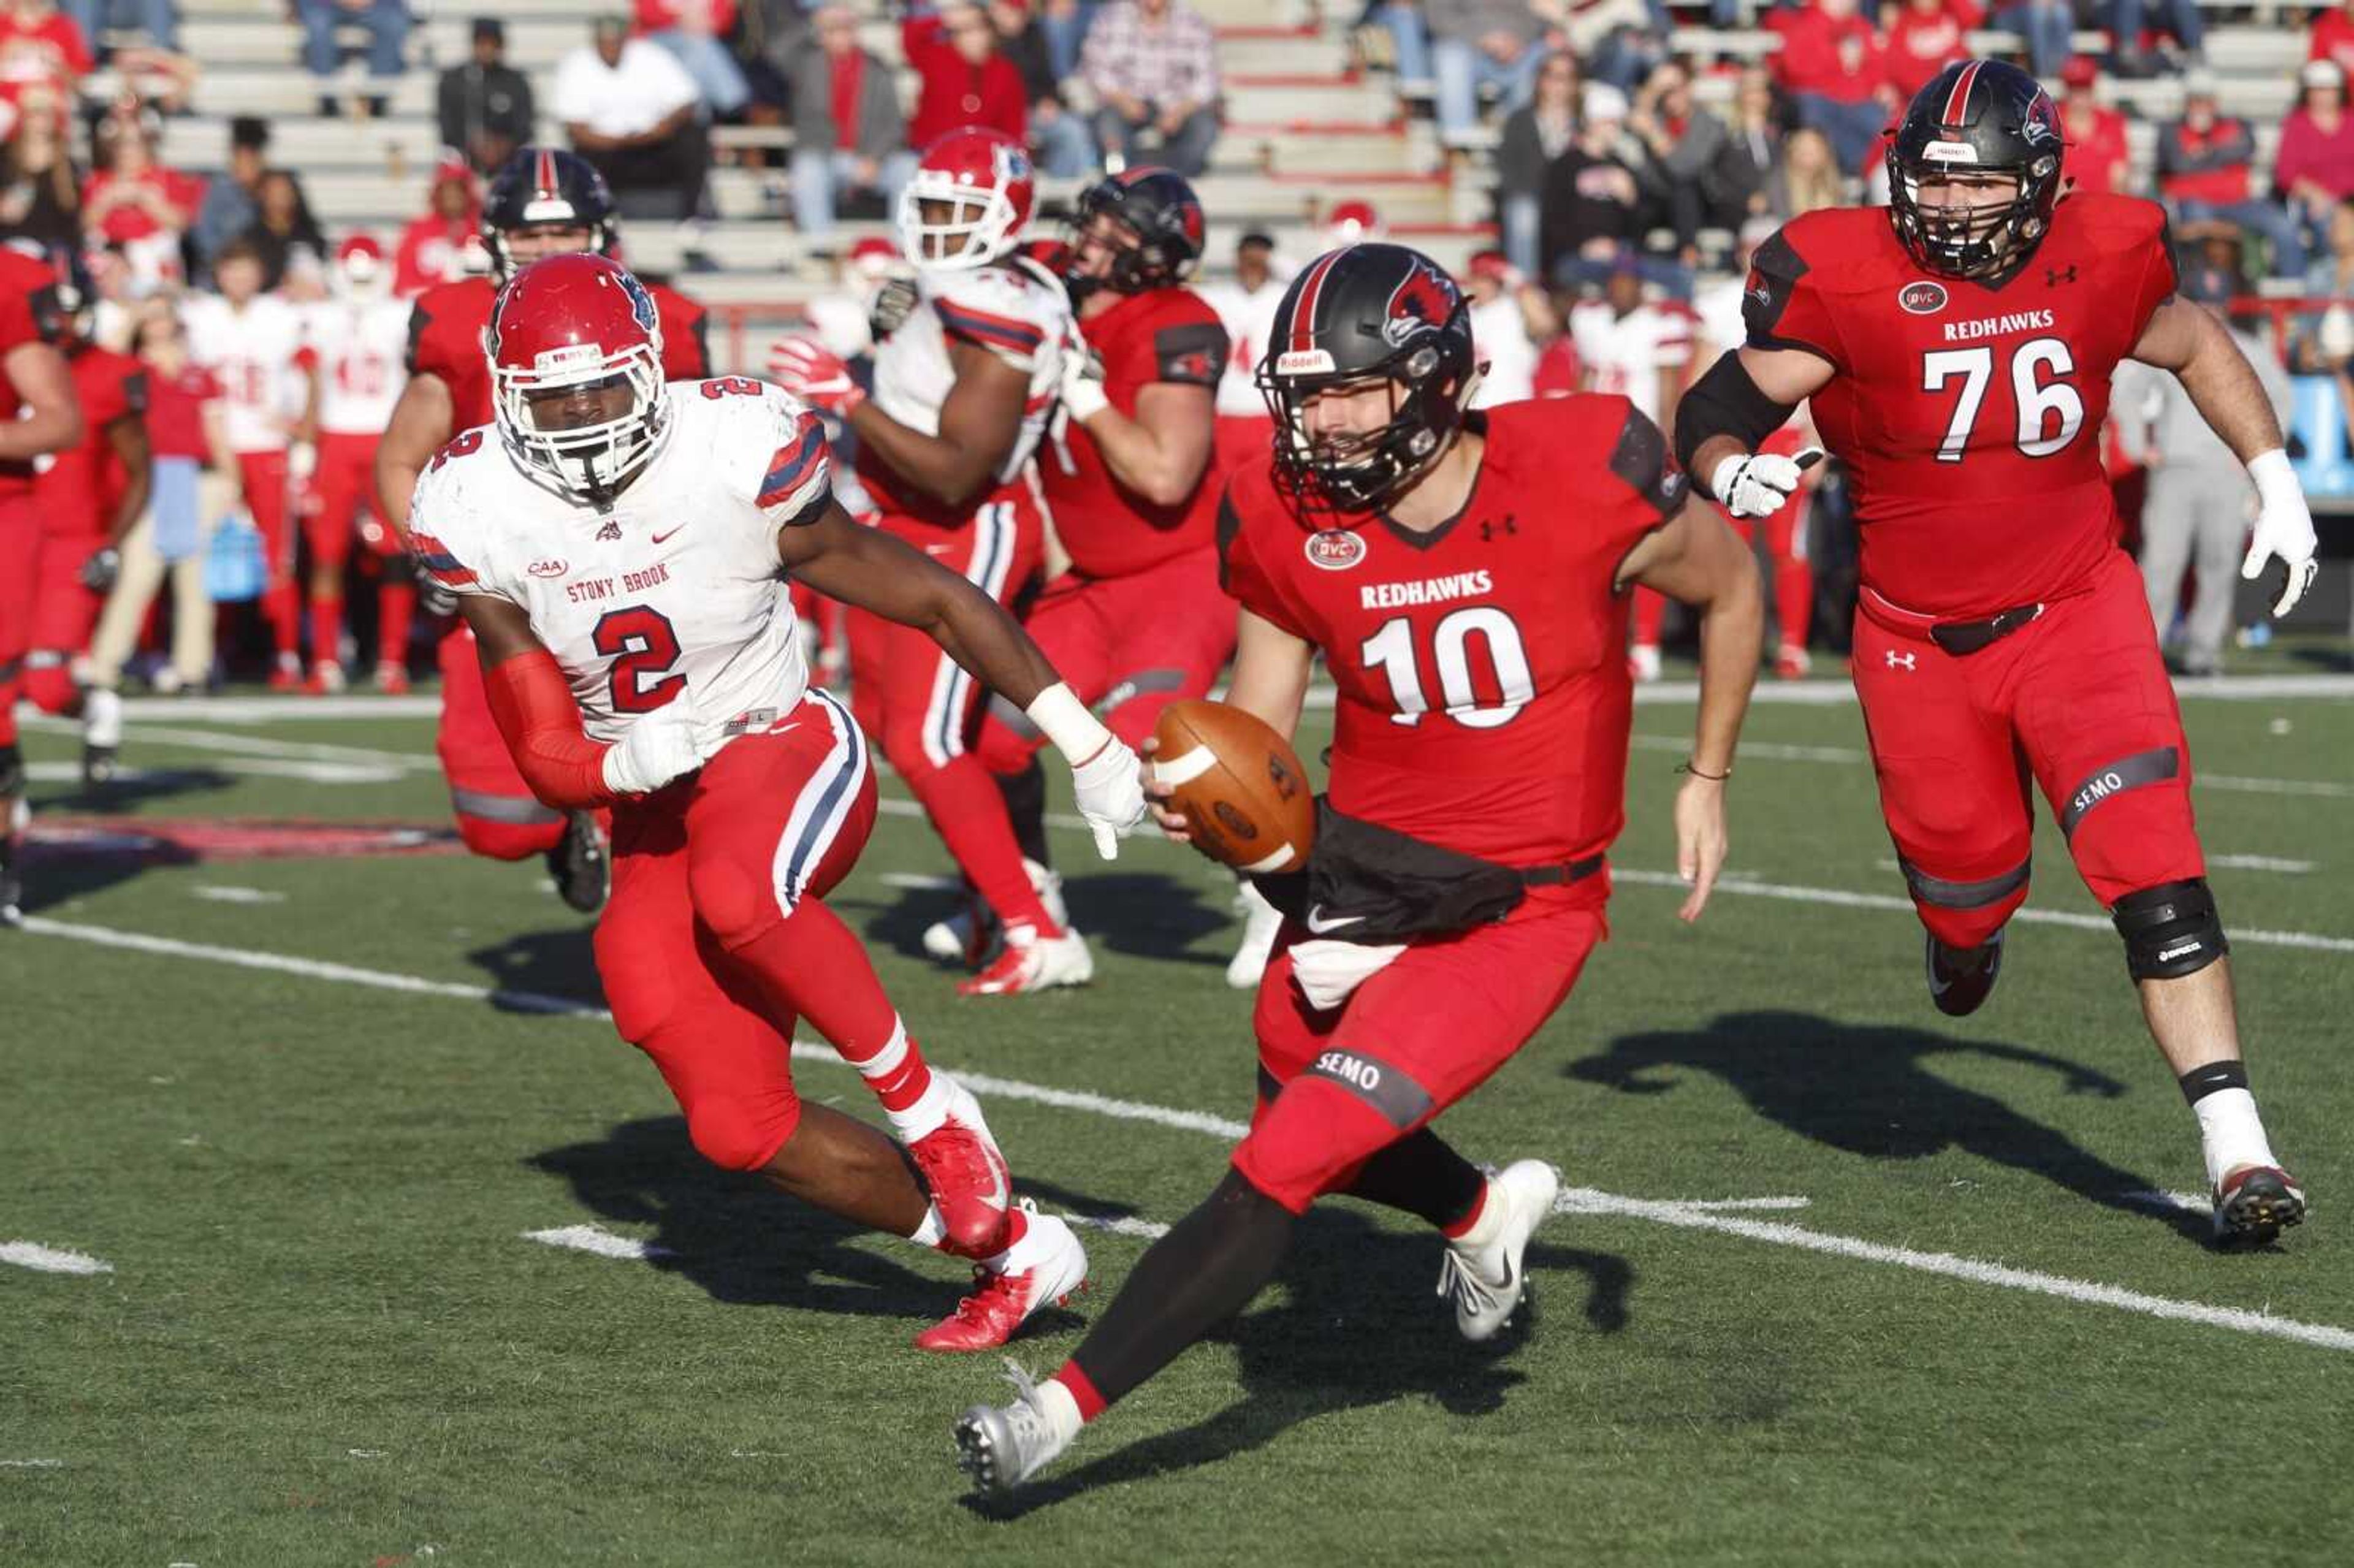 Junior quarterback Daniel Santacaterina weaves his way through Stony Brook's defense to get the Redhawks their first score of the game in the third quarter of a 28-14 playoff victory.